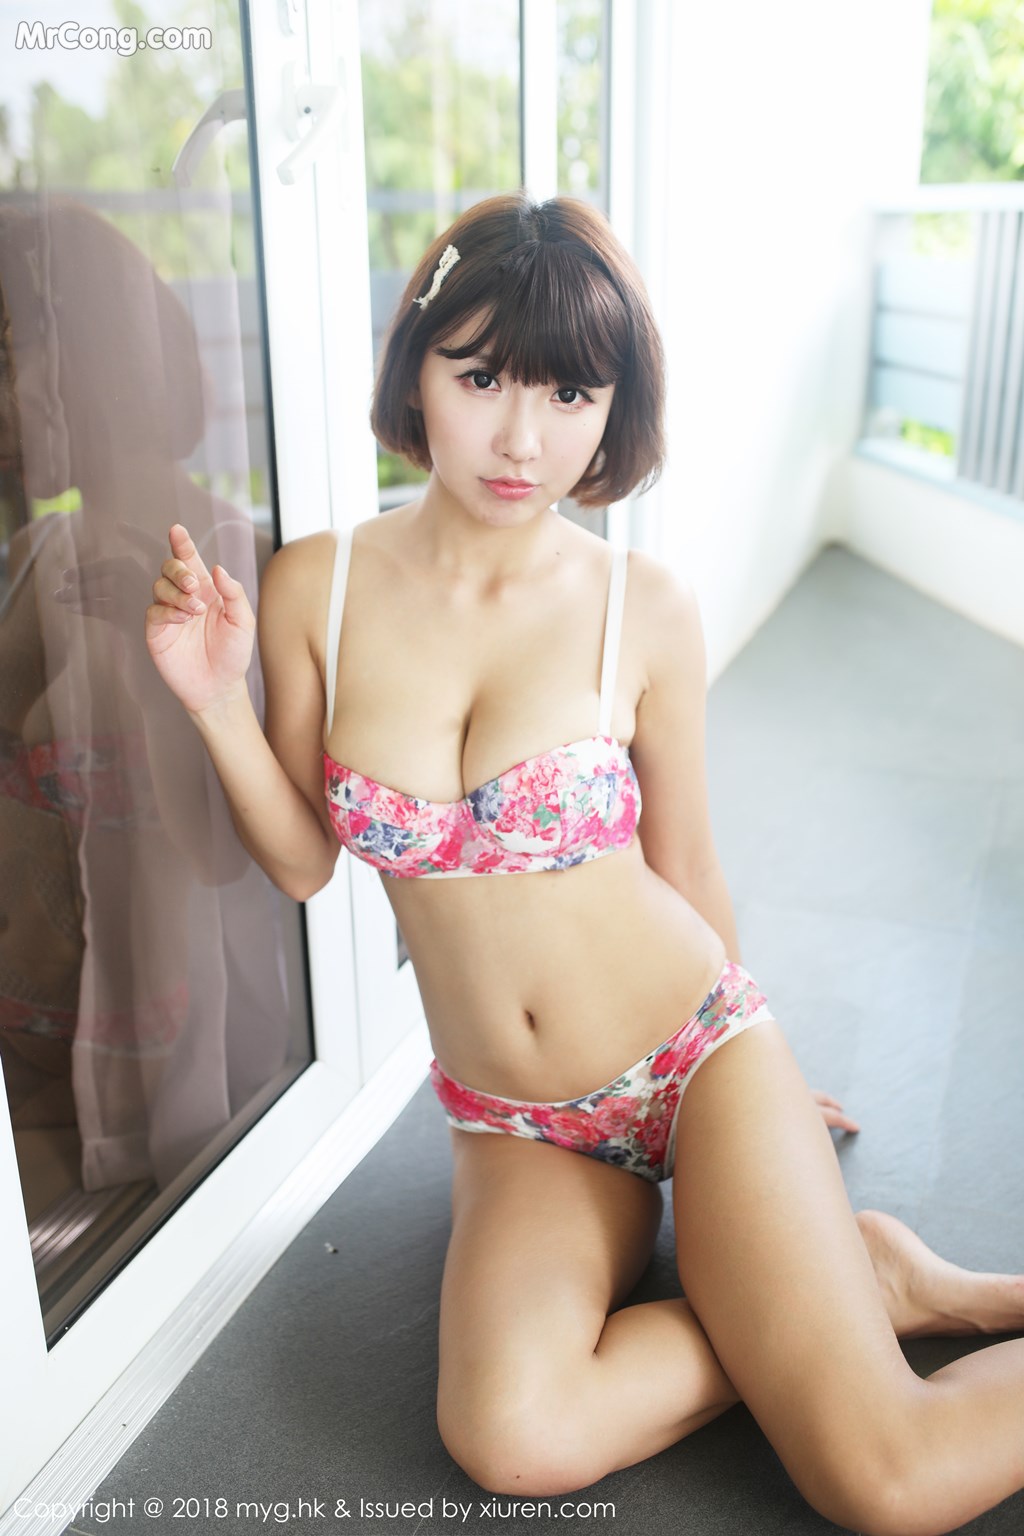 MyGirl Vol.276: Sunny Model (晓 茜) (66 pictures) photo 1-19